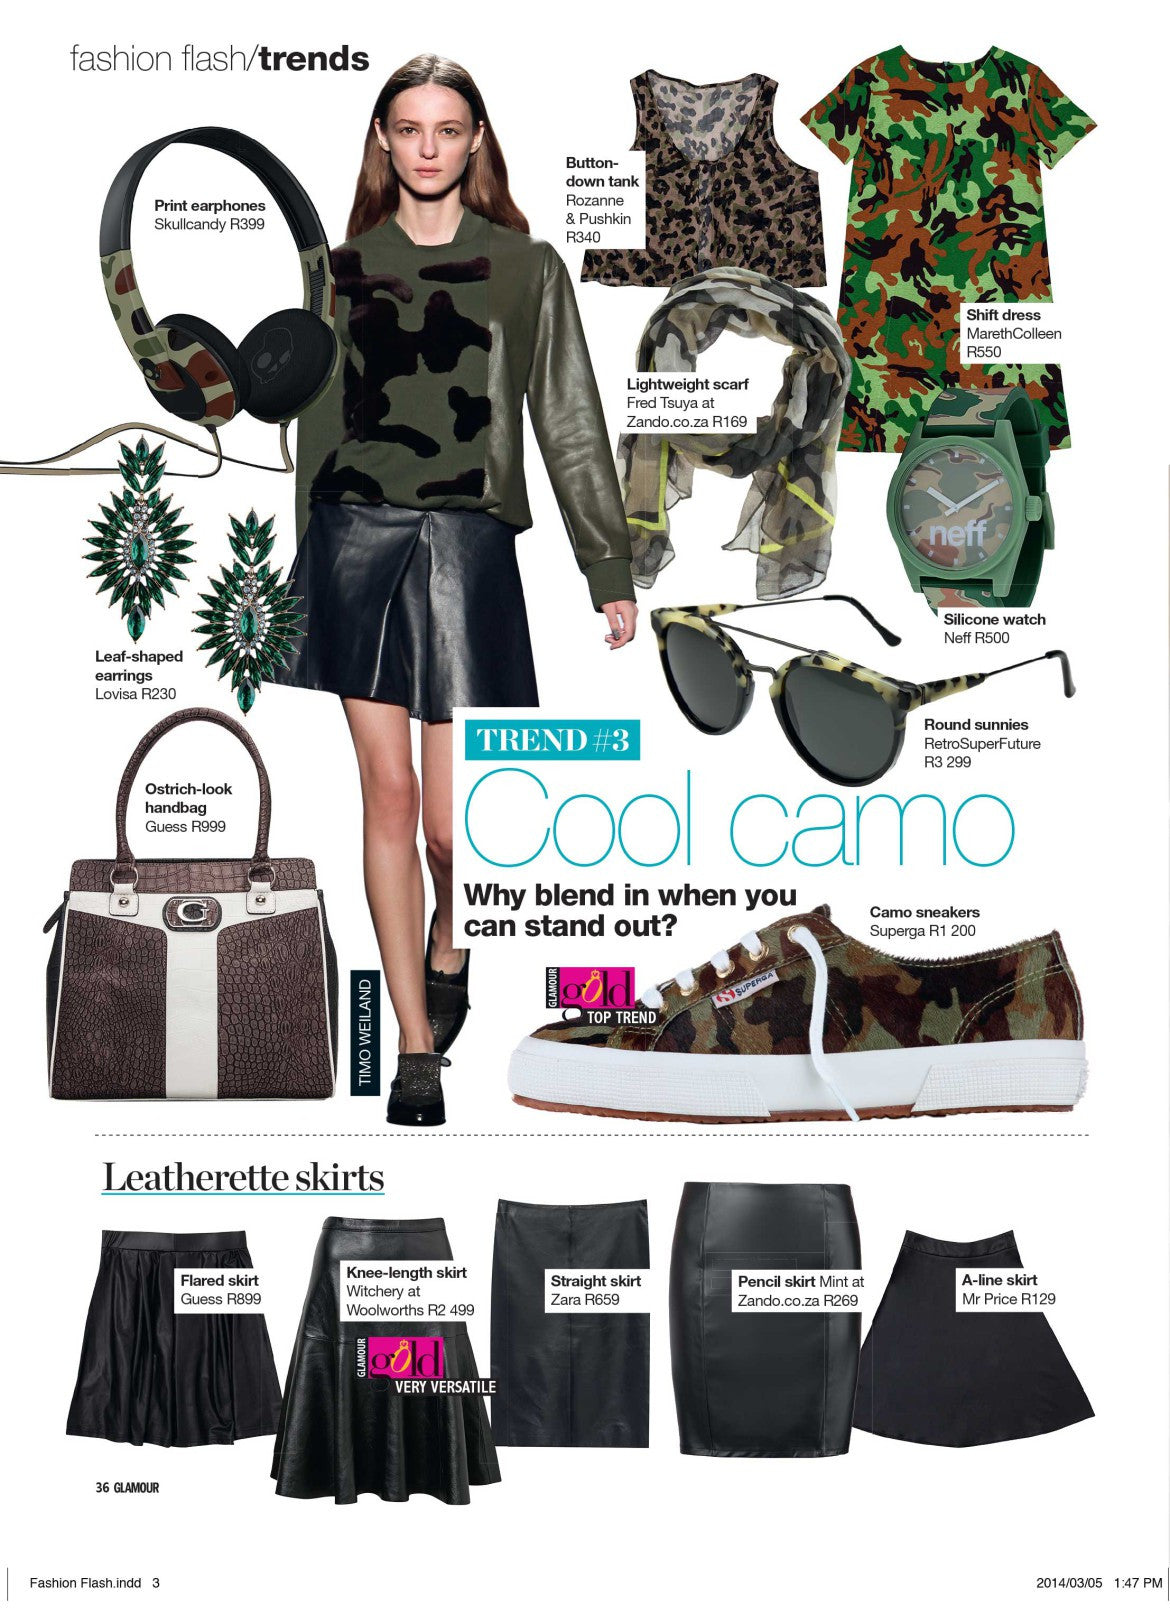 Media: The Camo Shift Features in Glamour Magazine